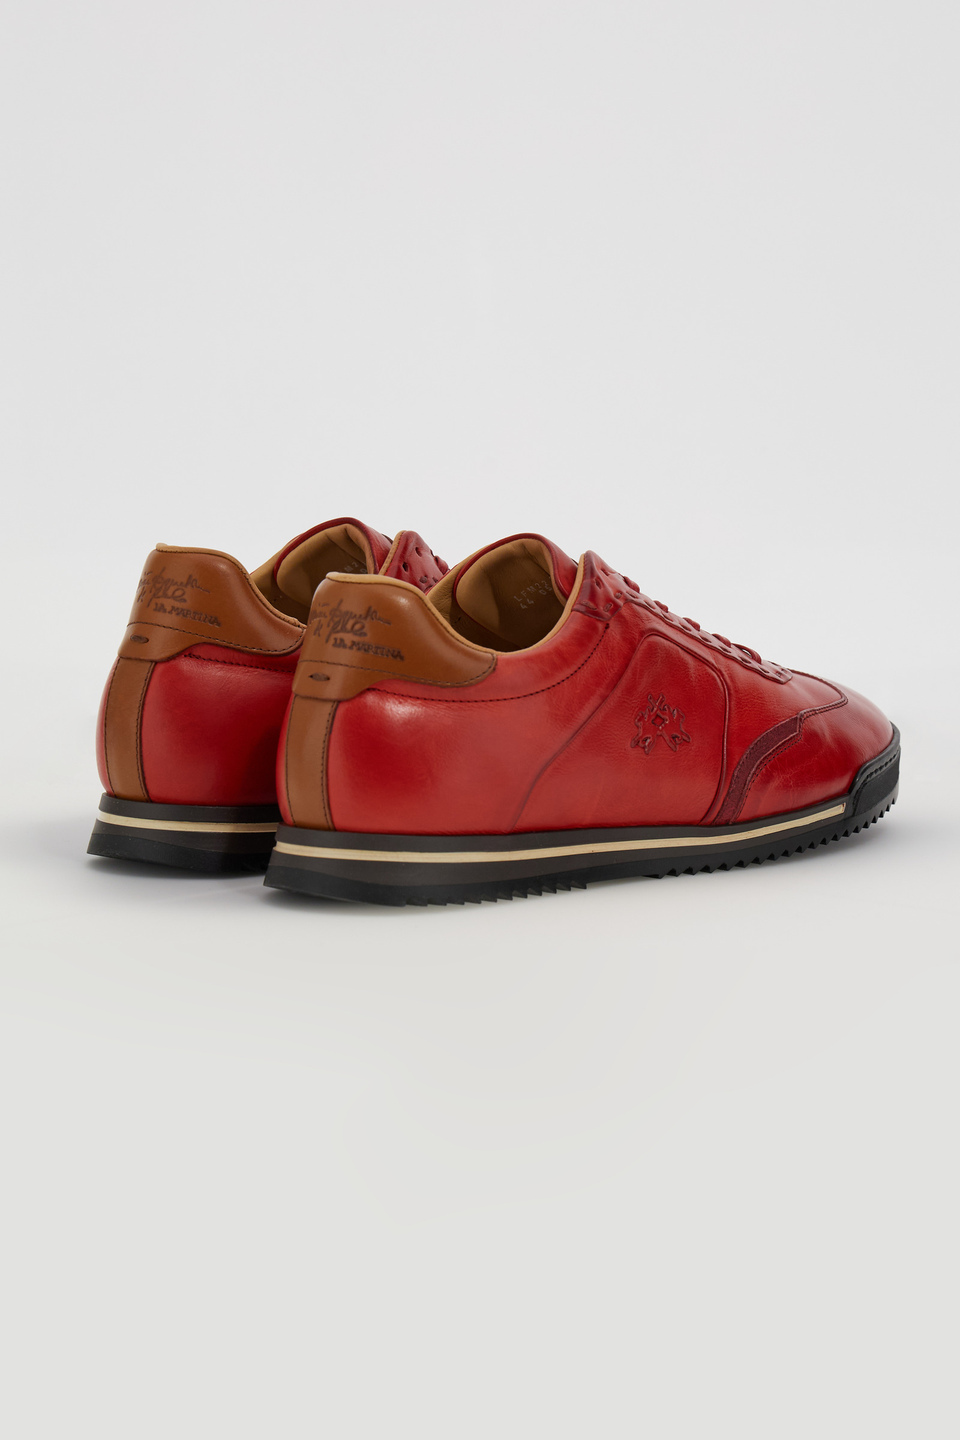 Heritage leather trainers | La Martina - Official Online Shop